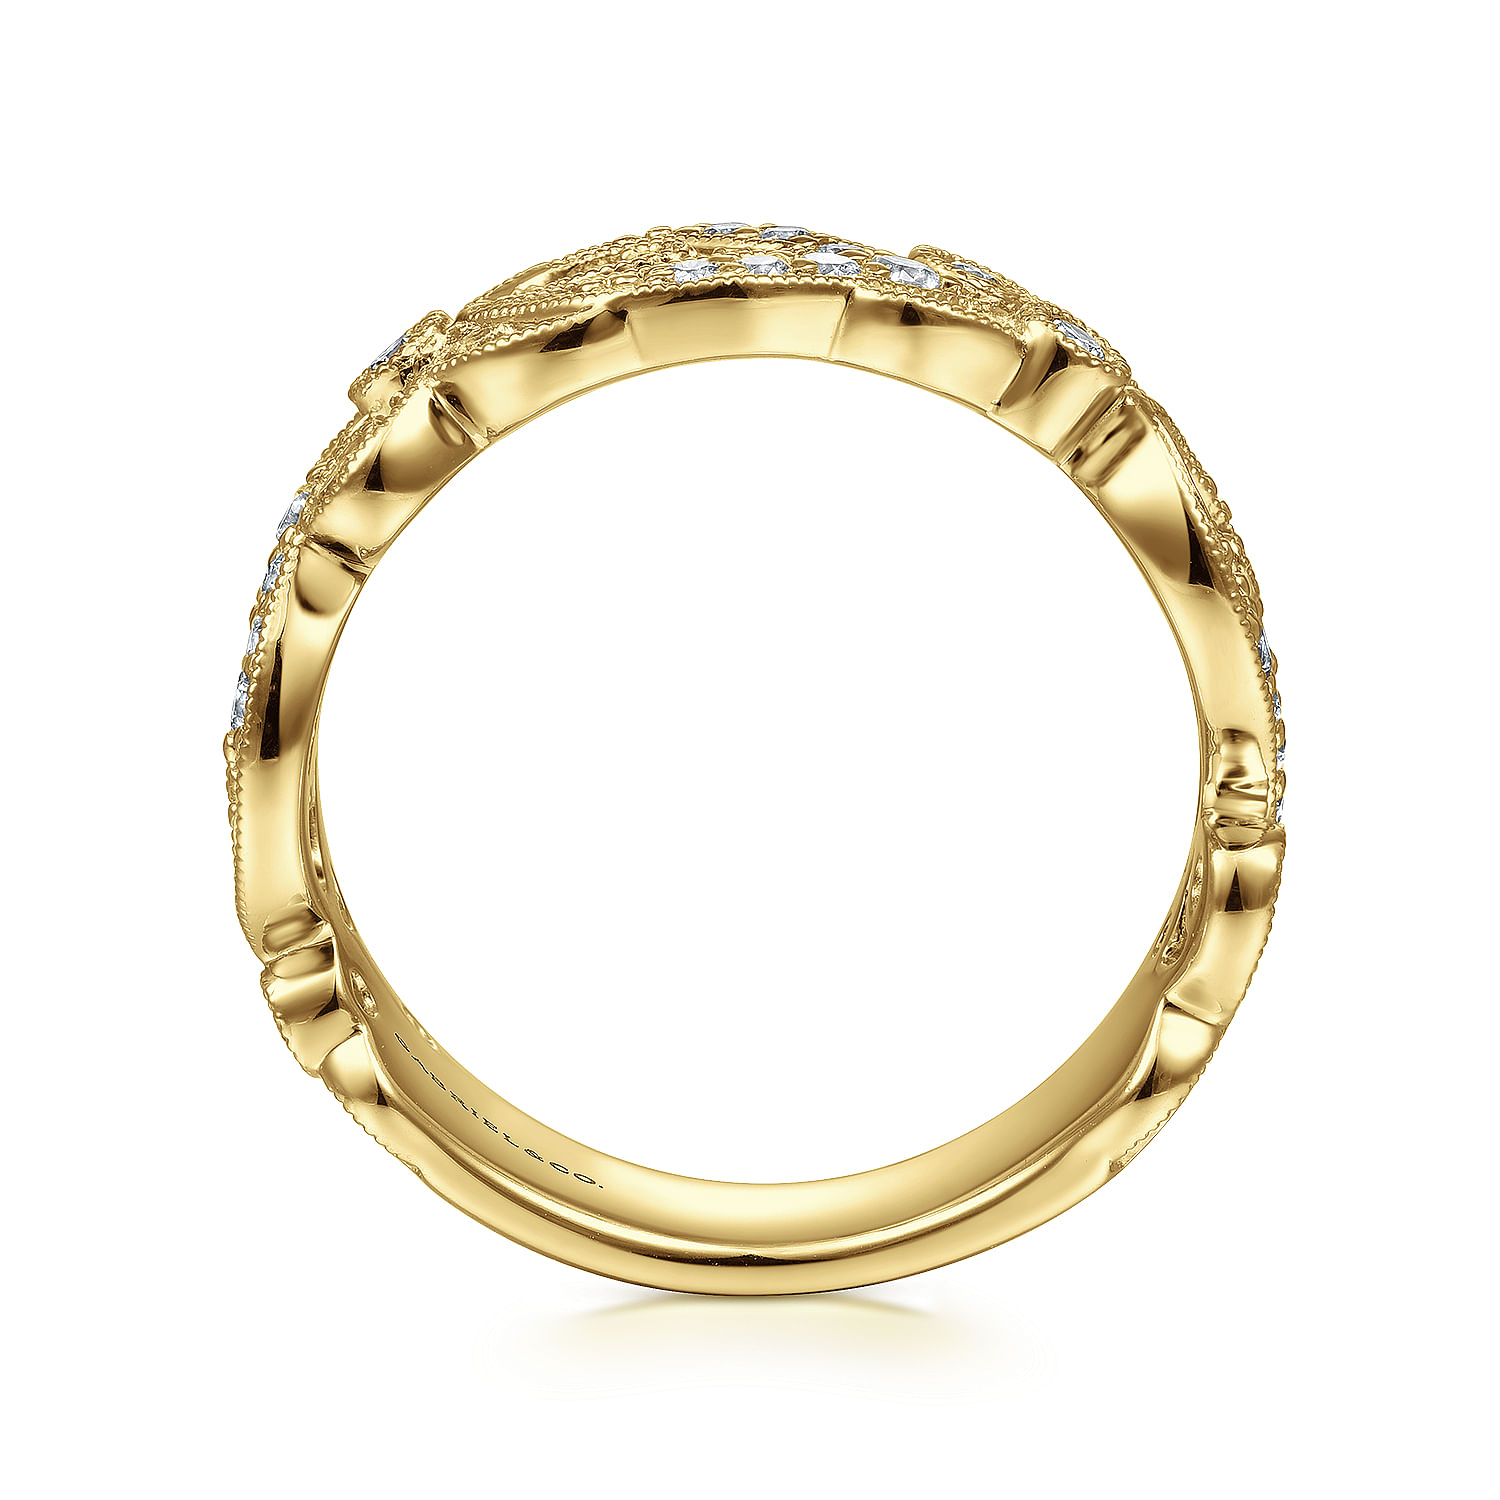 14K Yellow Gold Floral Inspired Diamond Stackable Ring